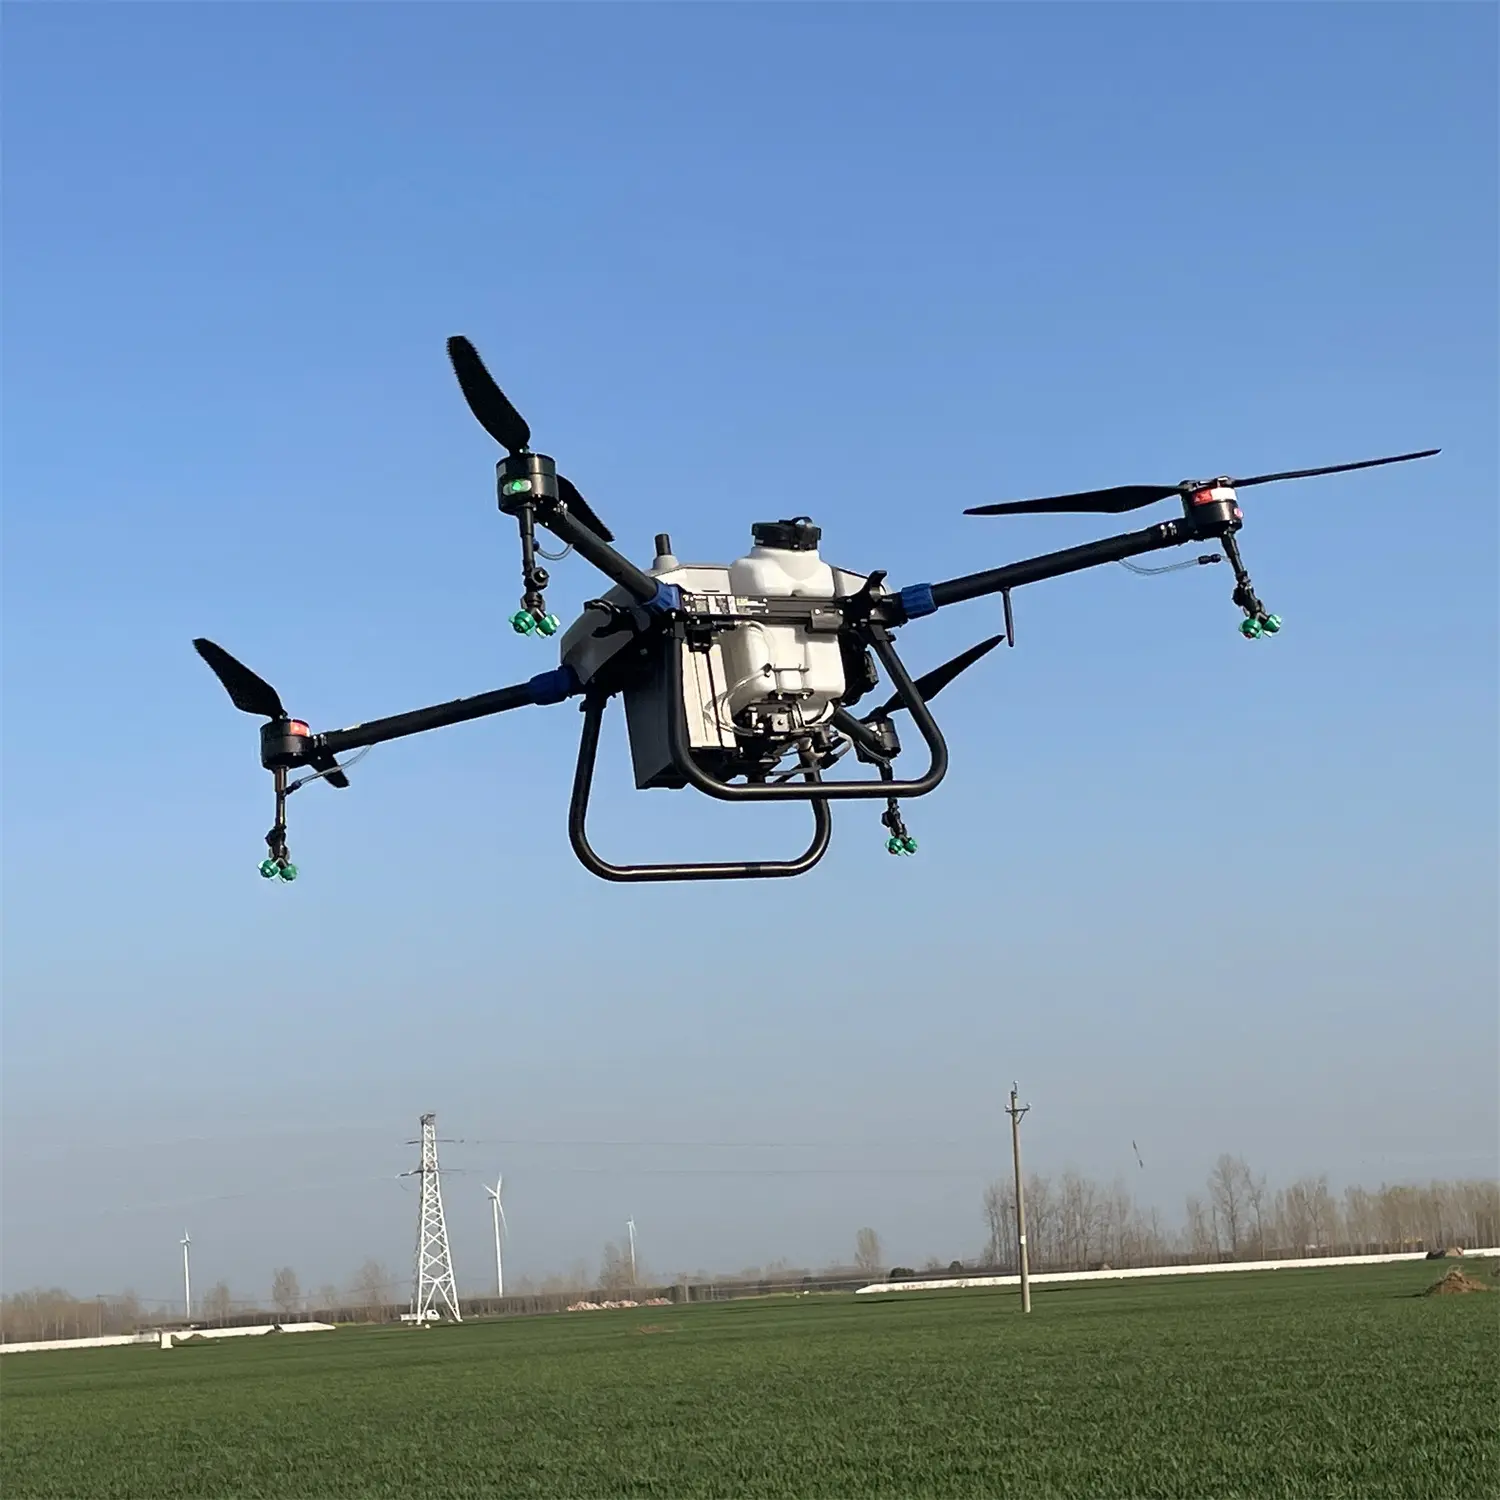 Newest selling 15L 8 nozzles crop Sprayer UAV Drone Agricultural Sprayer Helicopter Farm Tool Spraying for Farms sugarcane